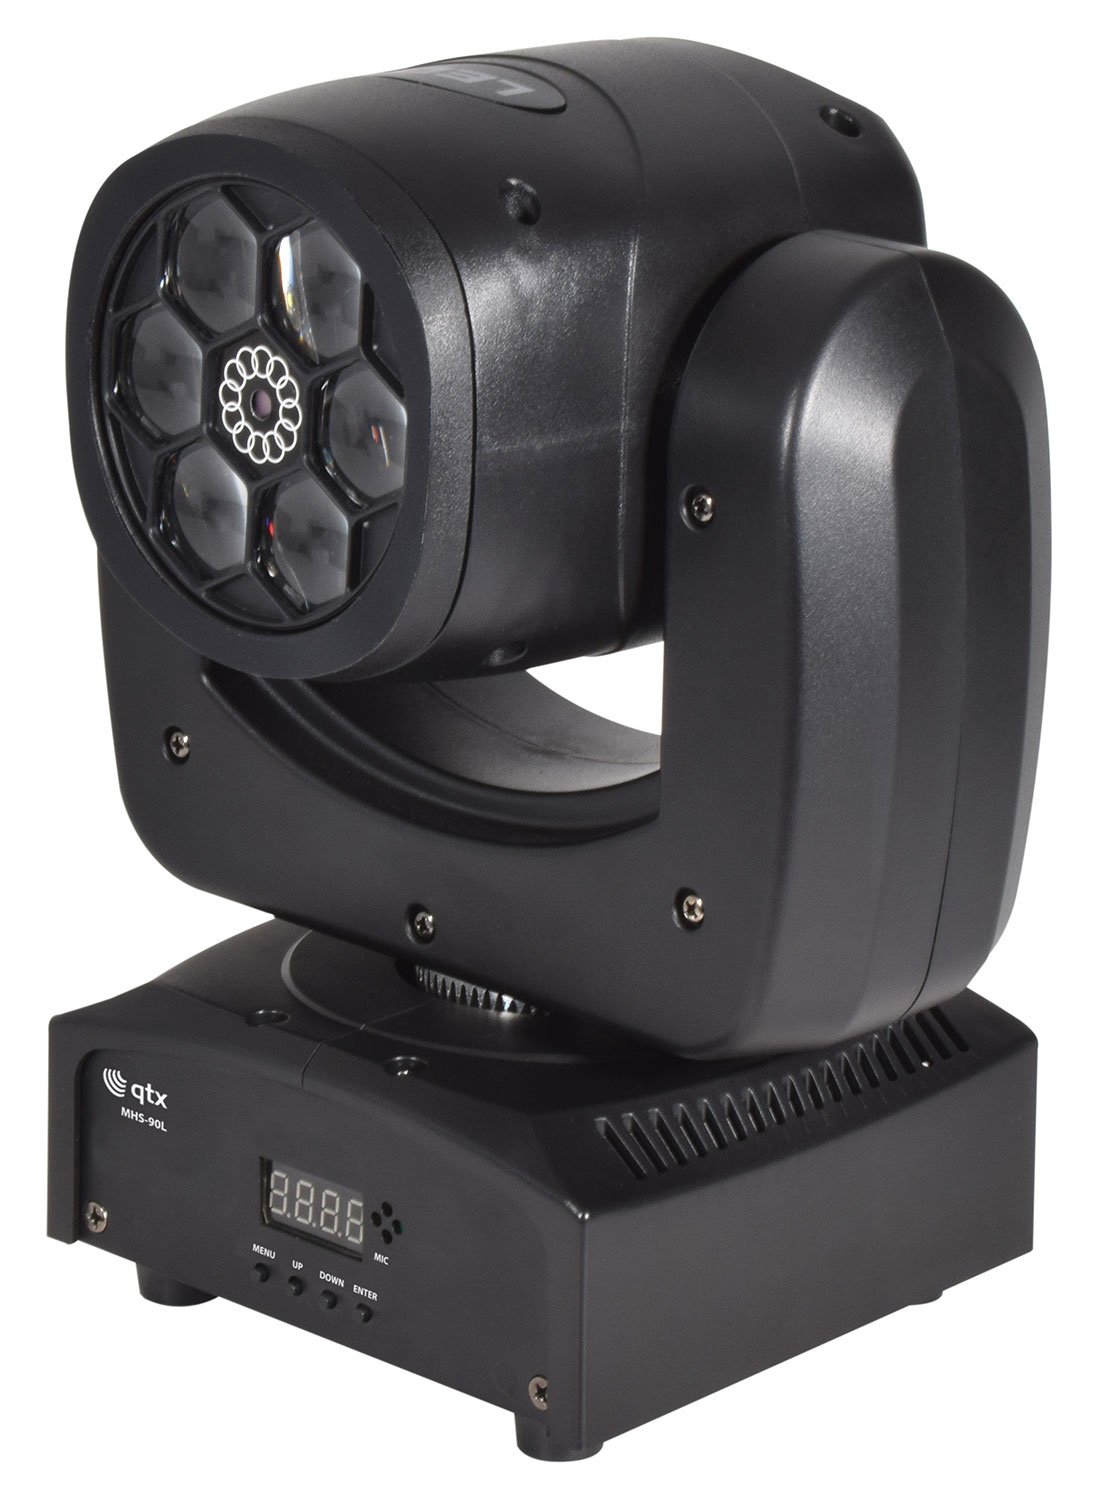 MHS-90L: 90W LED Moving Head with Laser Bee Eye: LED Moving Head with Laser